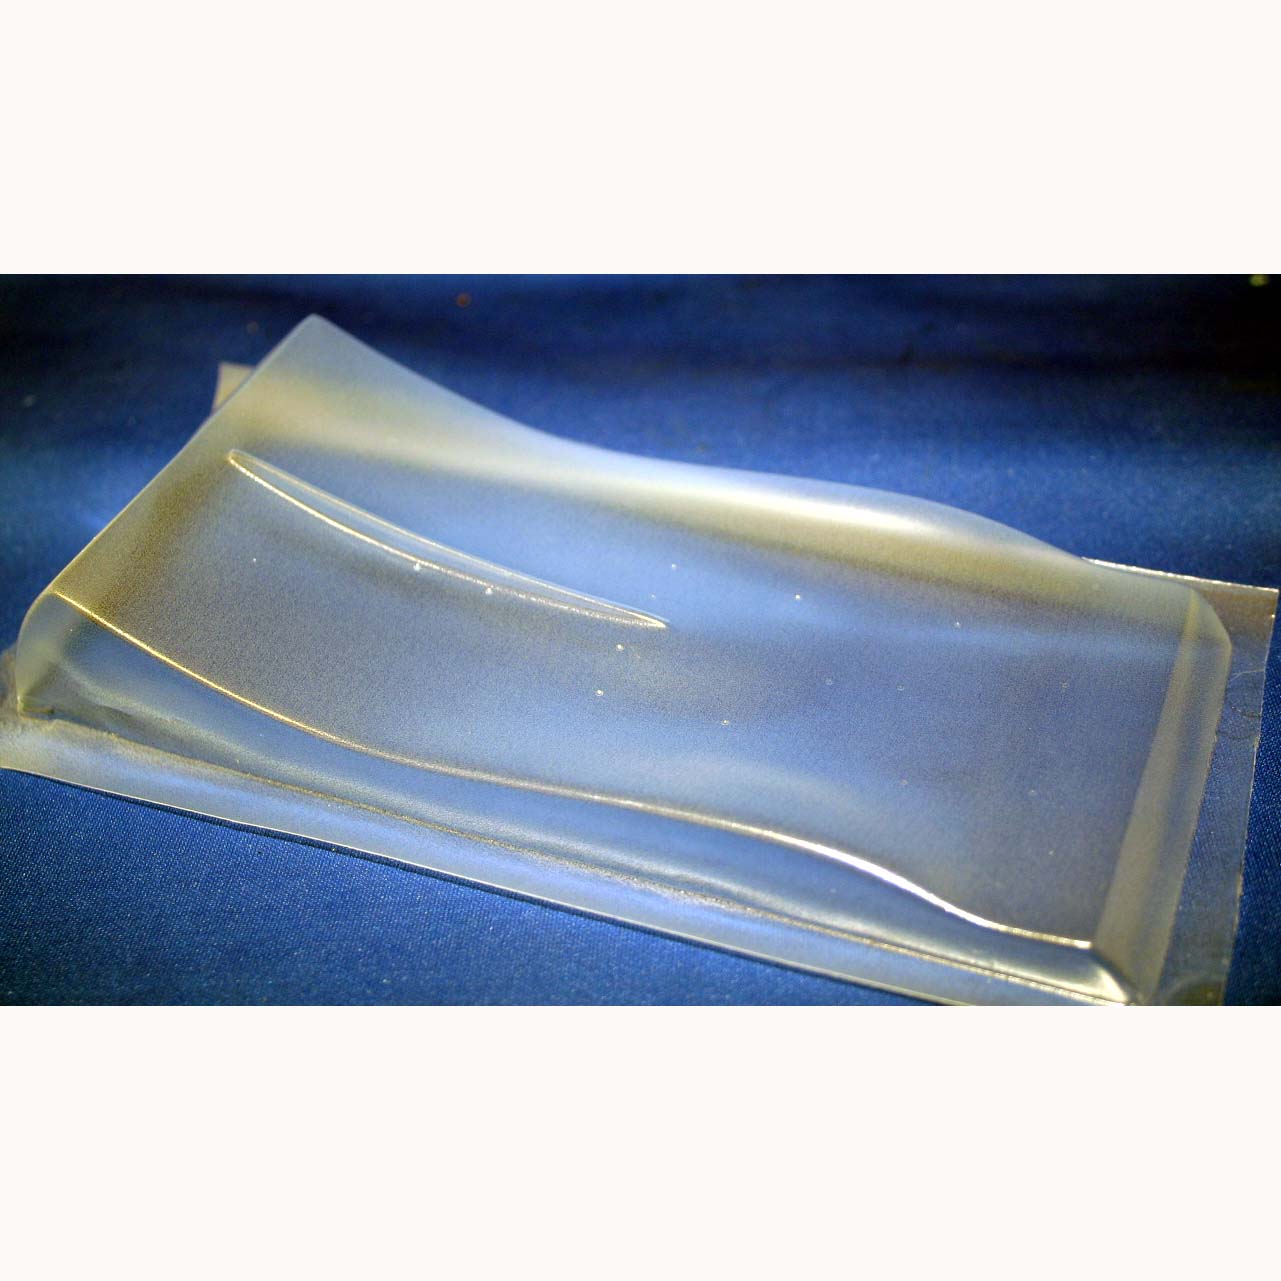 Koford Peugeot clear wing car body .005 